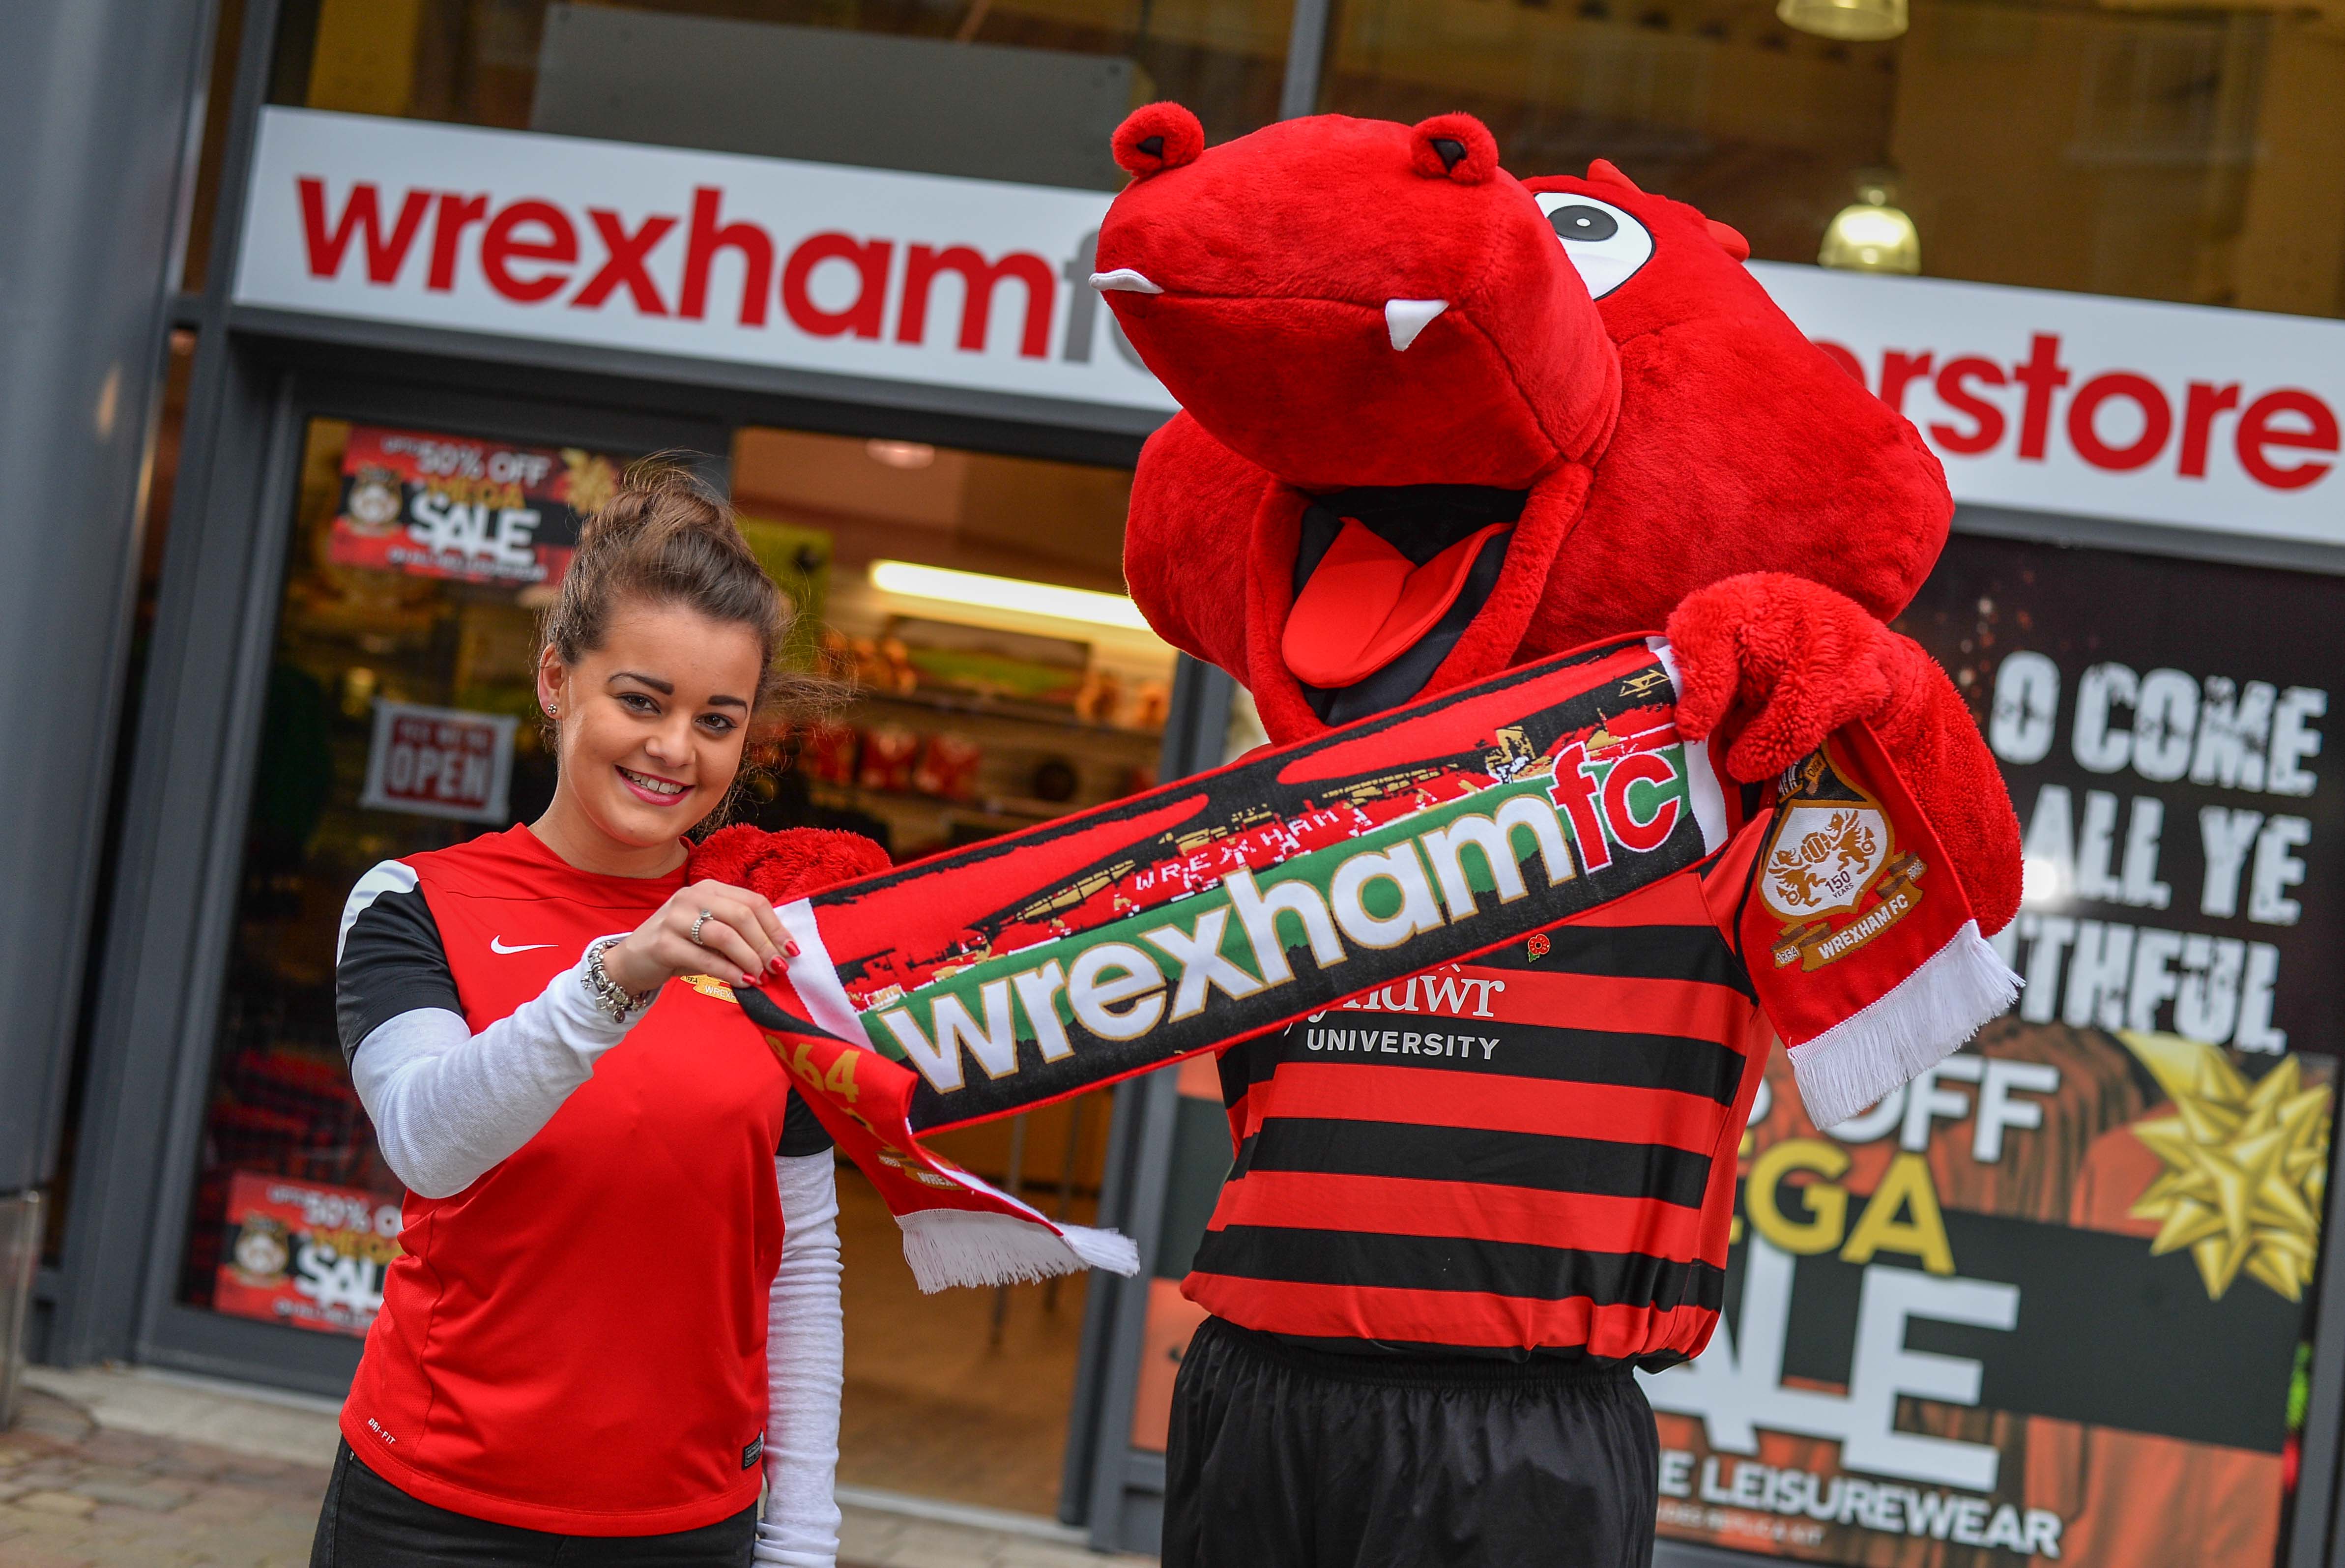 Wrexham FC scores big hit with record sales at pop-up shop